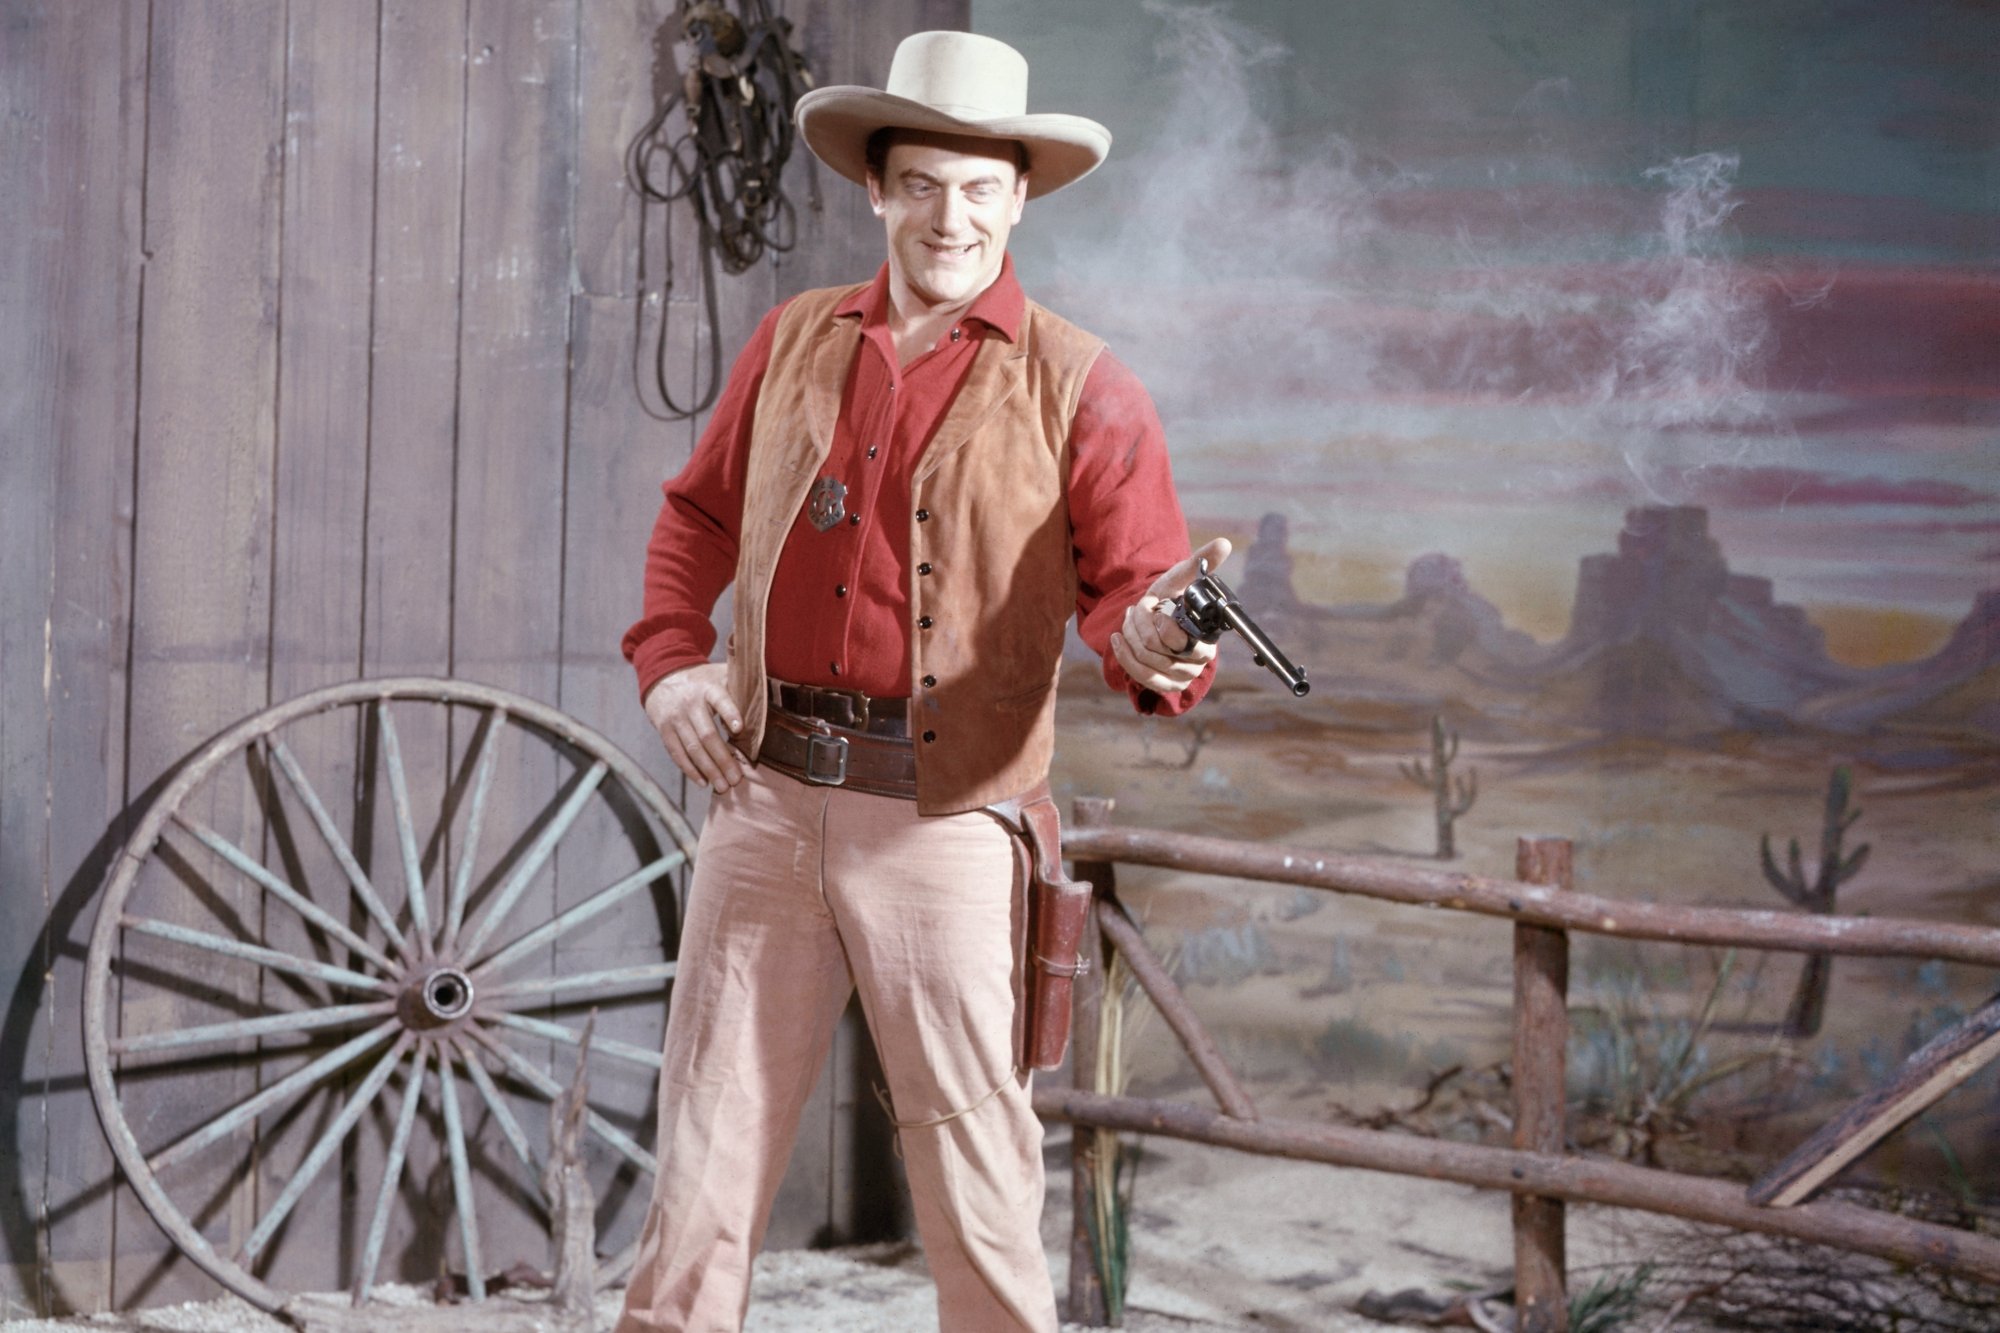 'Gunsmoke' James Arness as U.S. Marshal Matt Dillon wearing a Western outfit, holding out his pistol. He has a smile on his face.